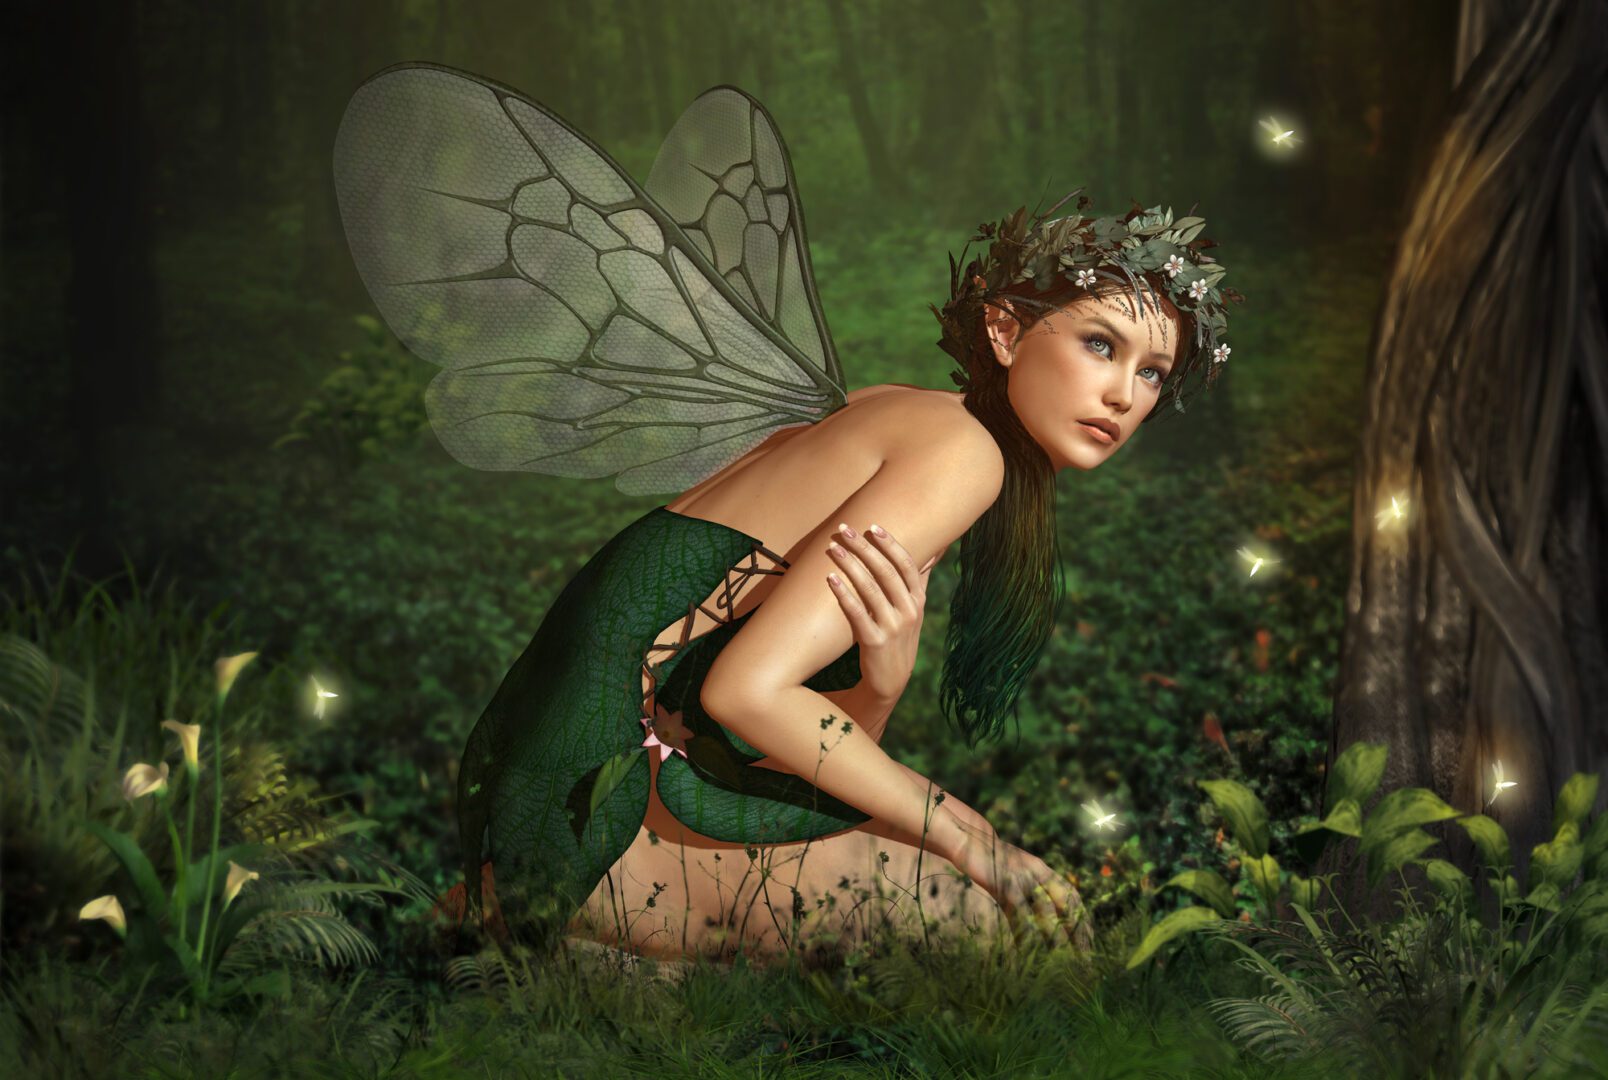 A fairy sitting in the grass with her wings spread.